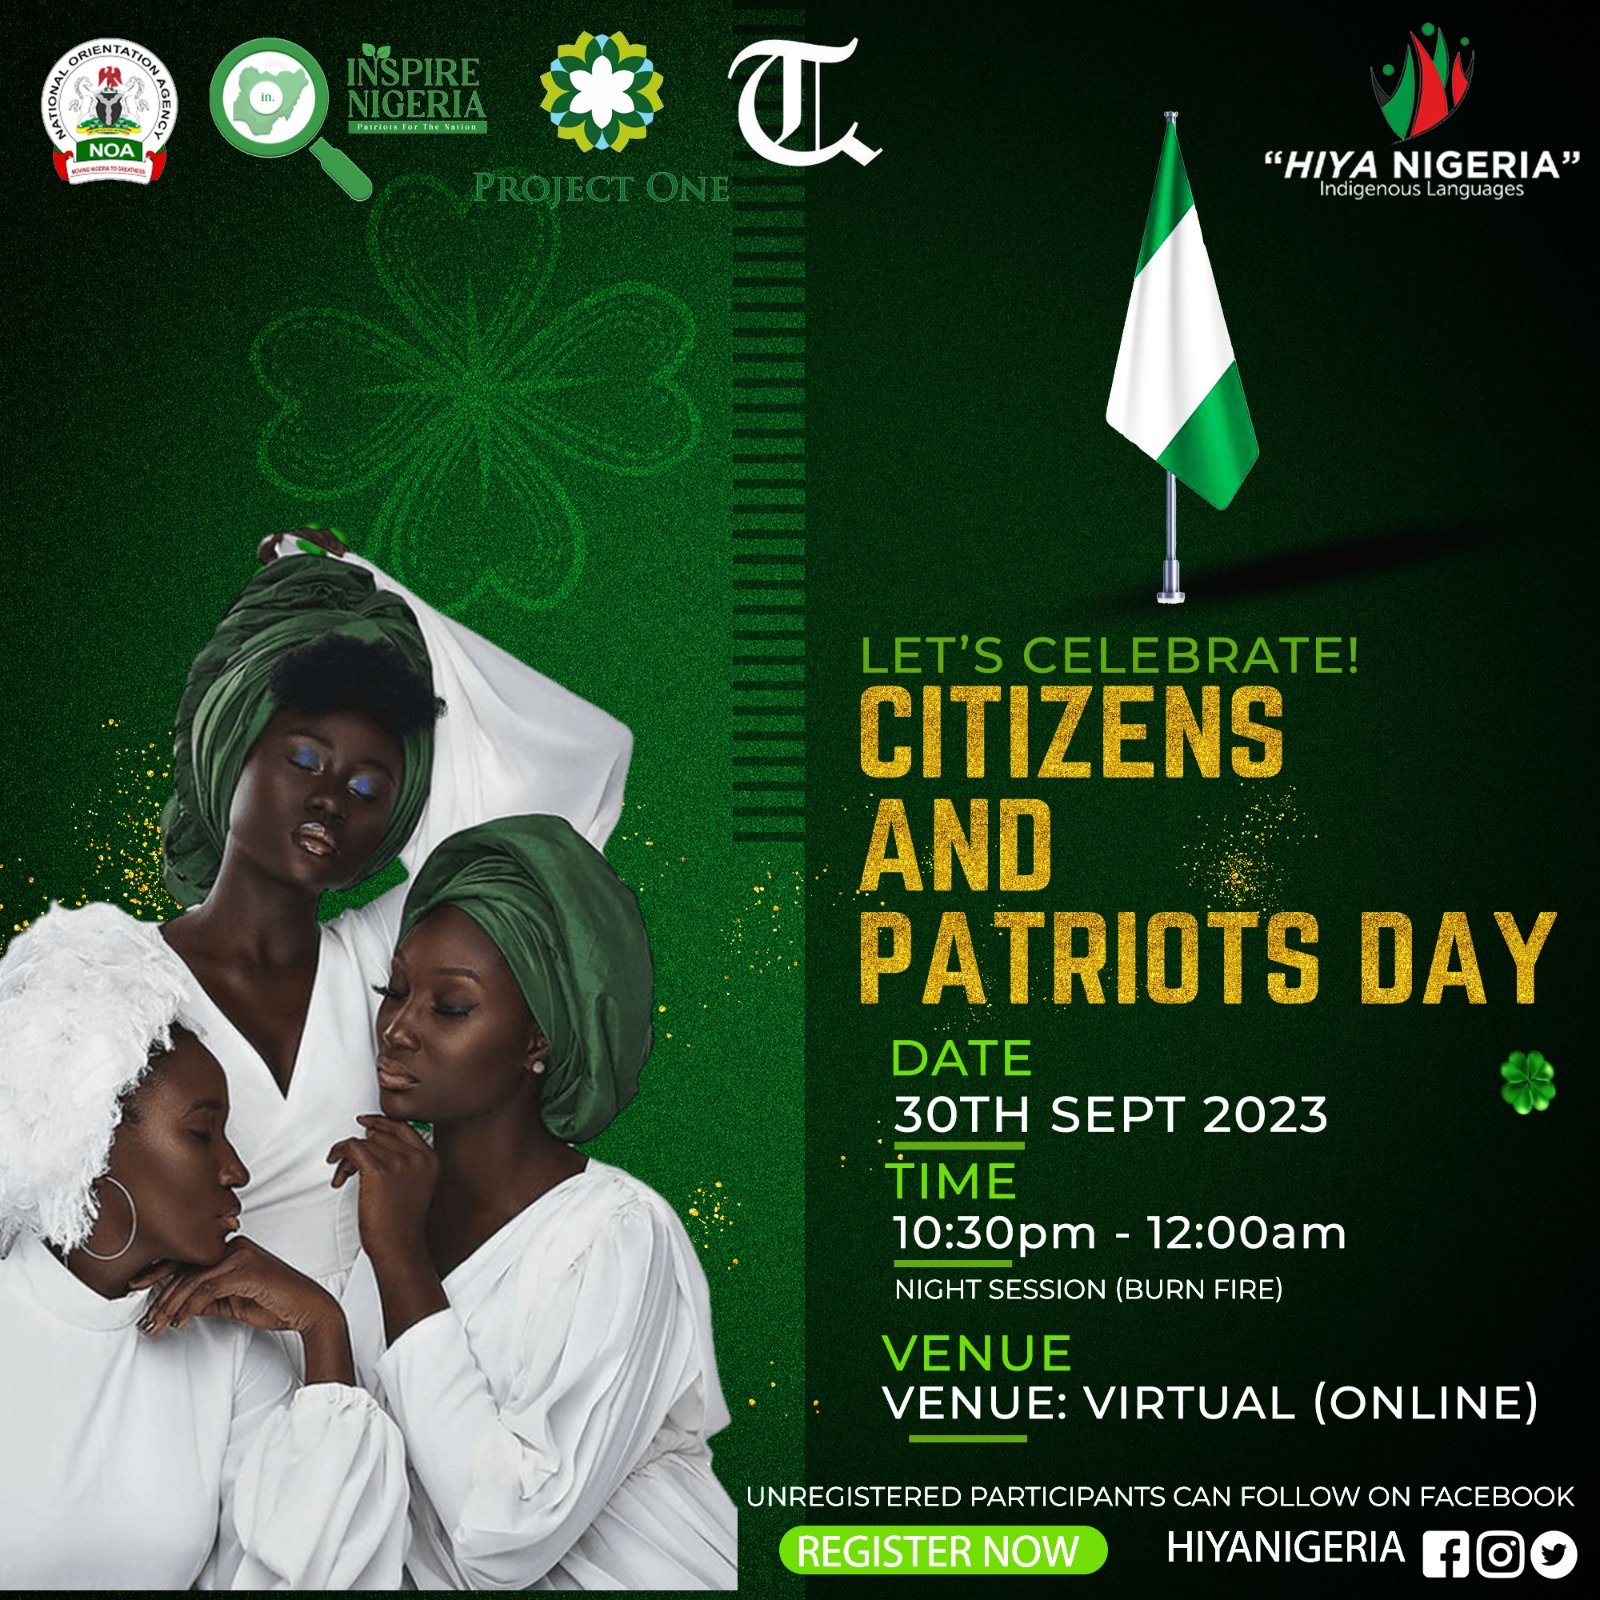 CITIZENS AND PATRIOTS DAY 2023